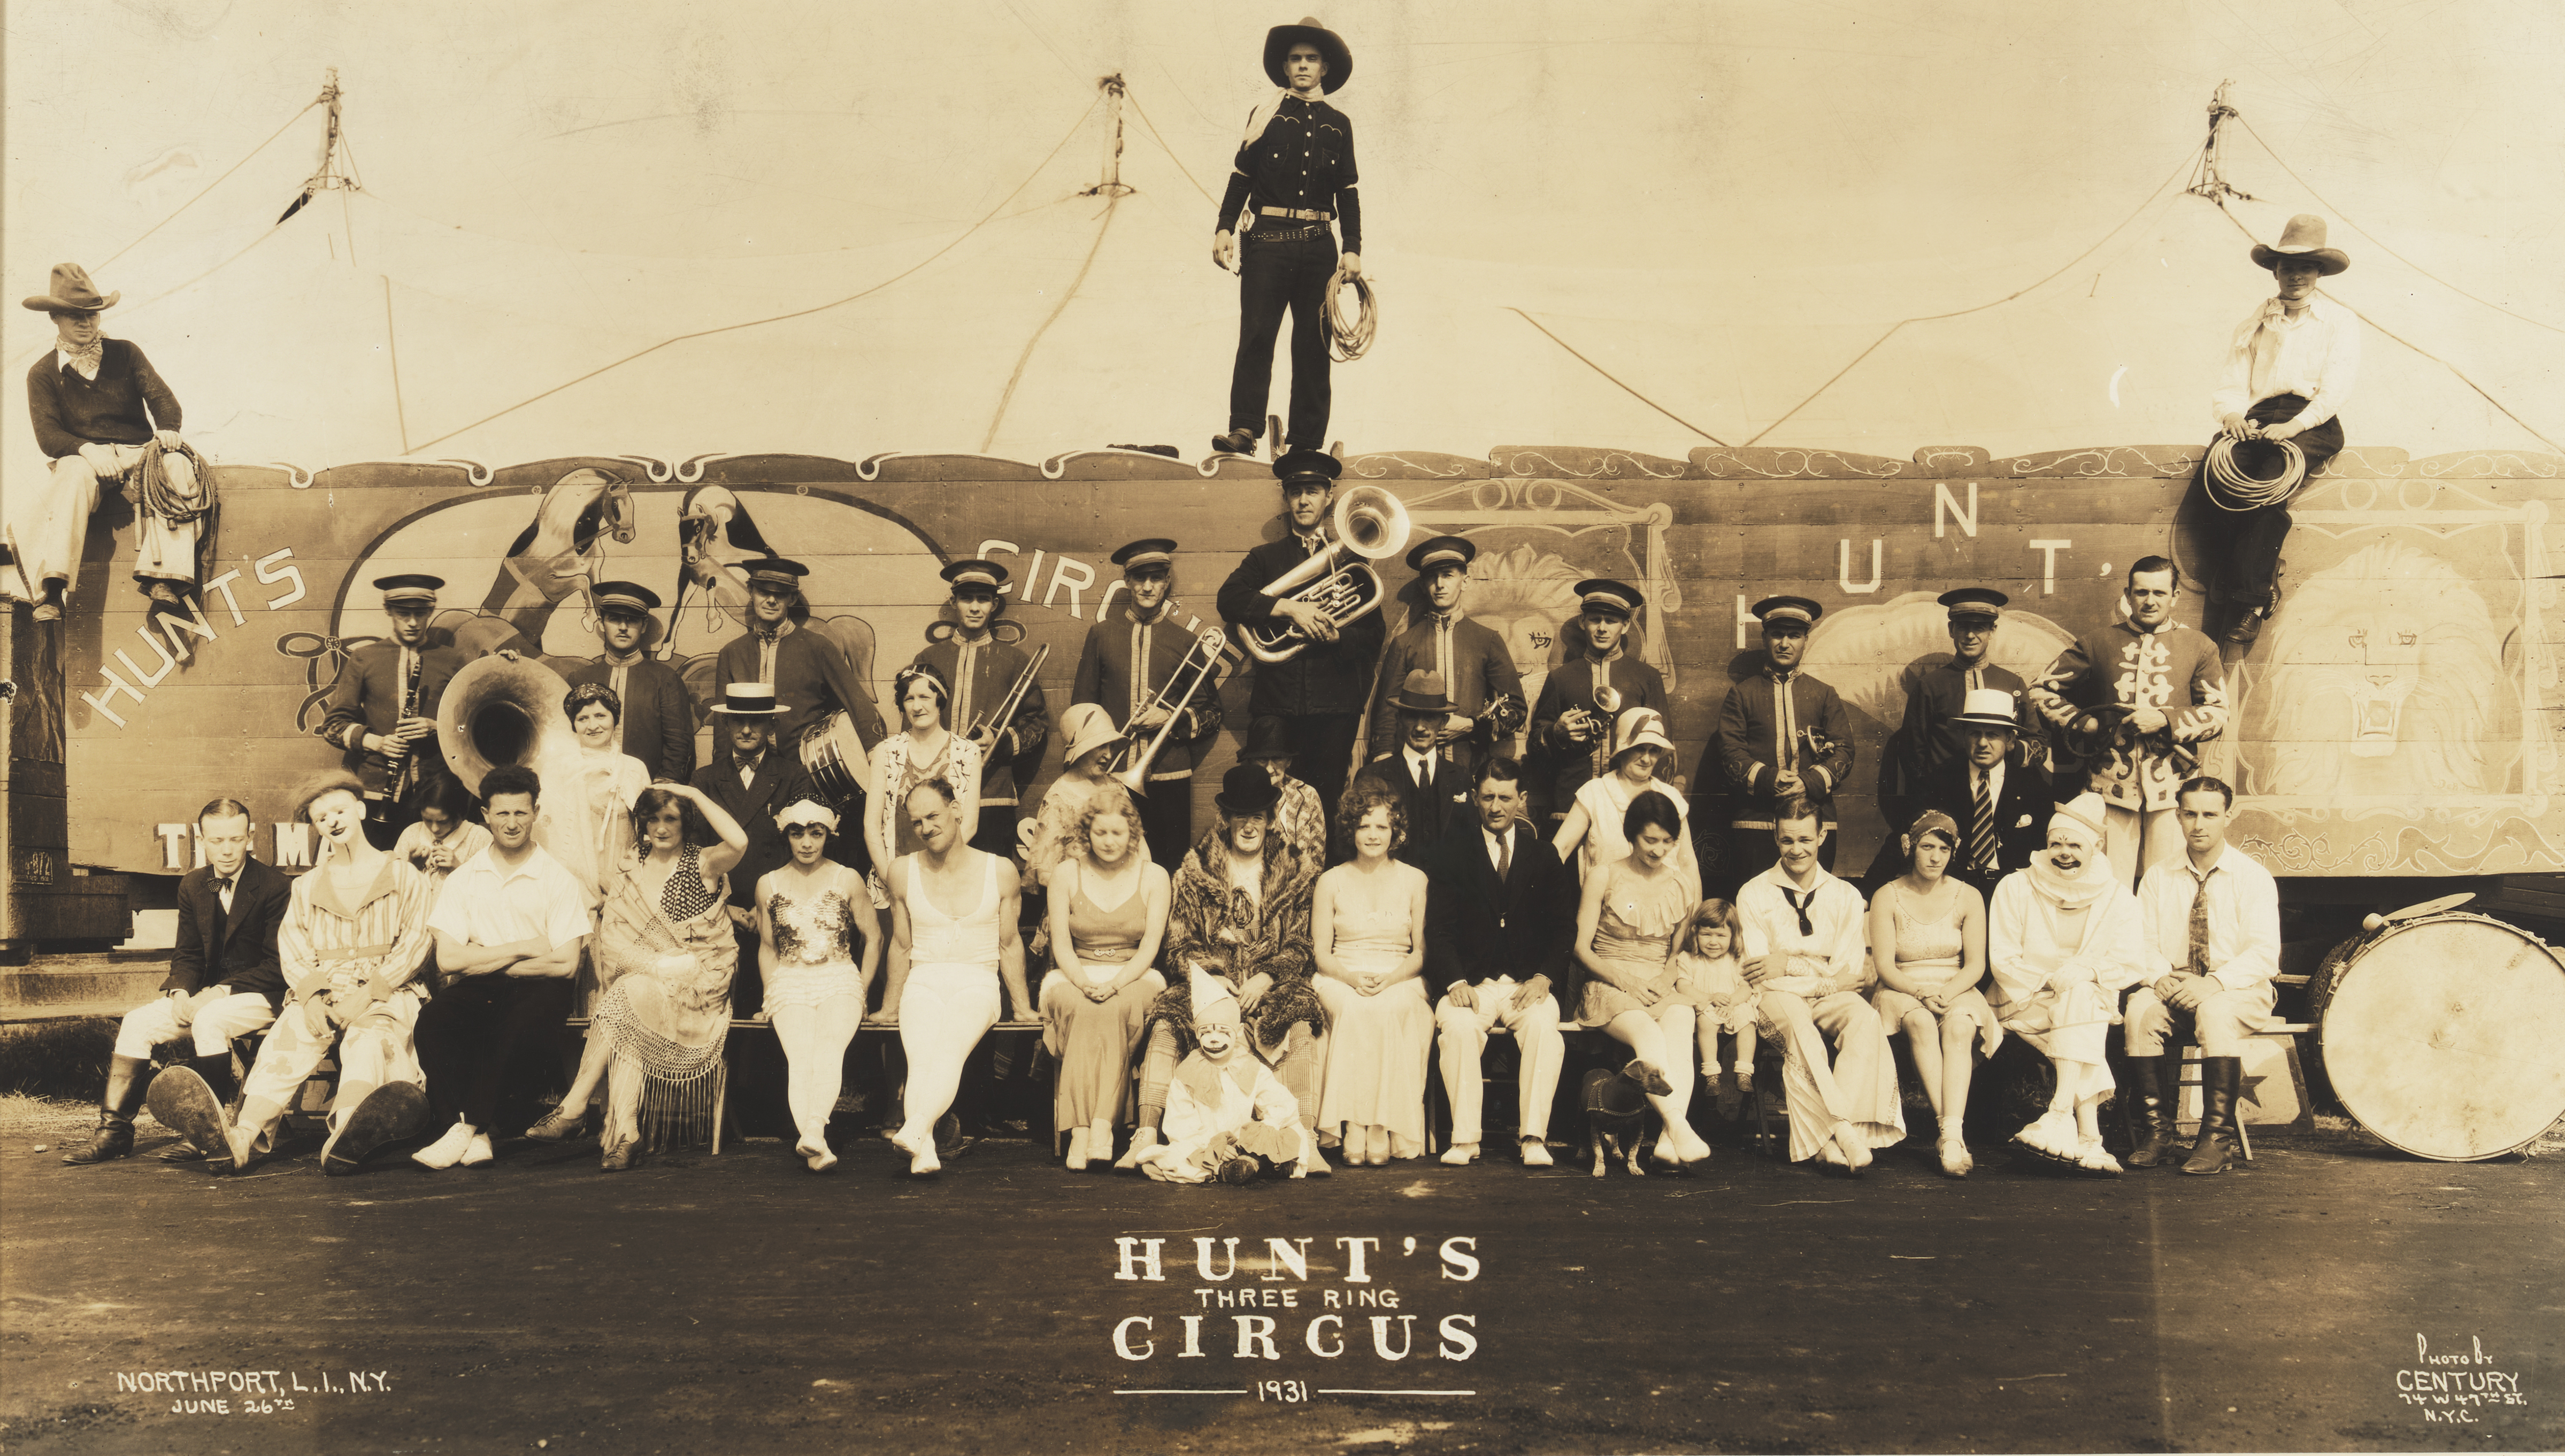 “Hunt’s Three Ring, Circus”, 1921, “Northport, LI, NY June 26th”,
                              “Photo by “Century 74 W. 47th St. NYC